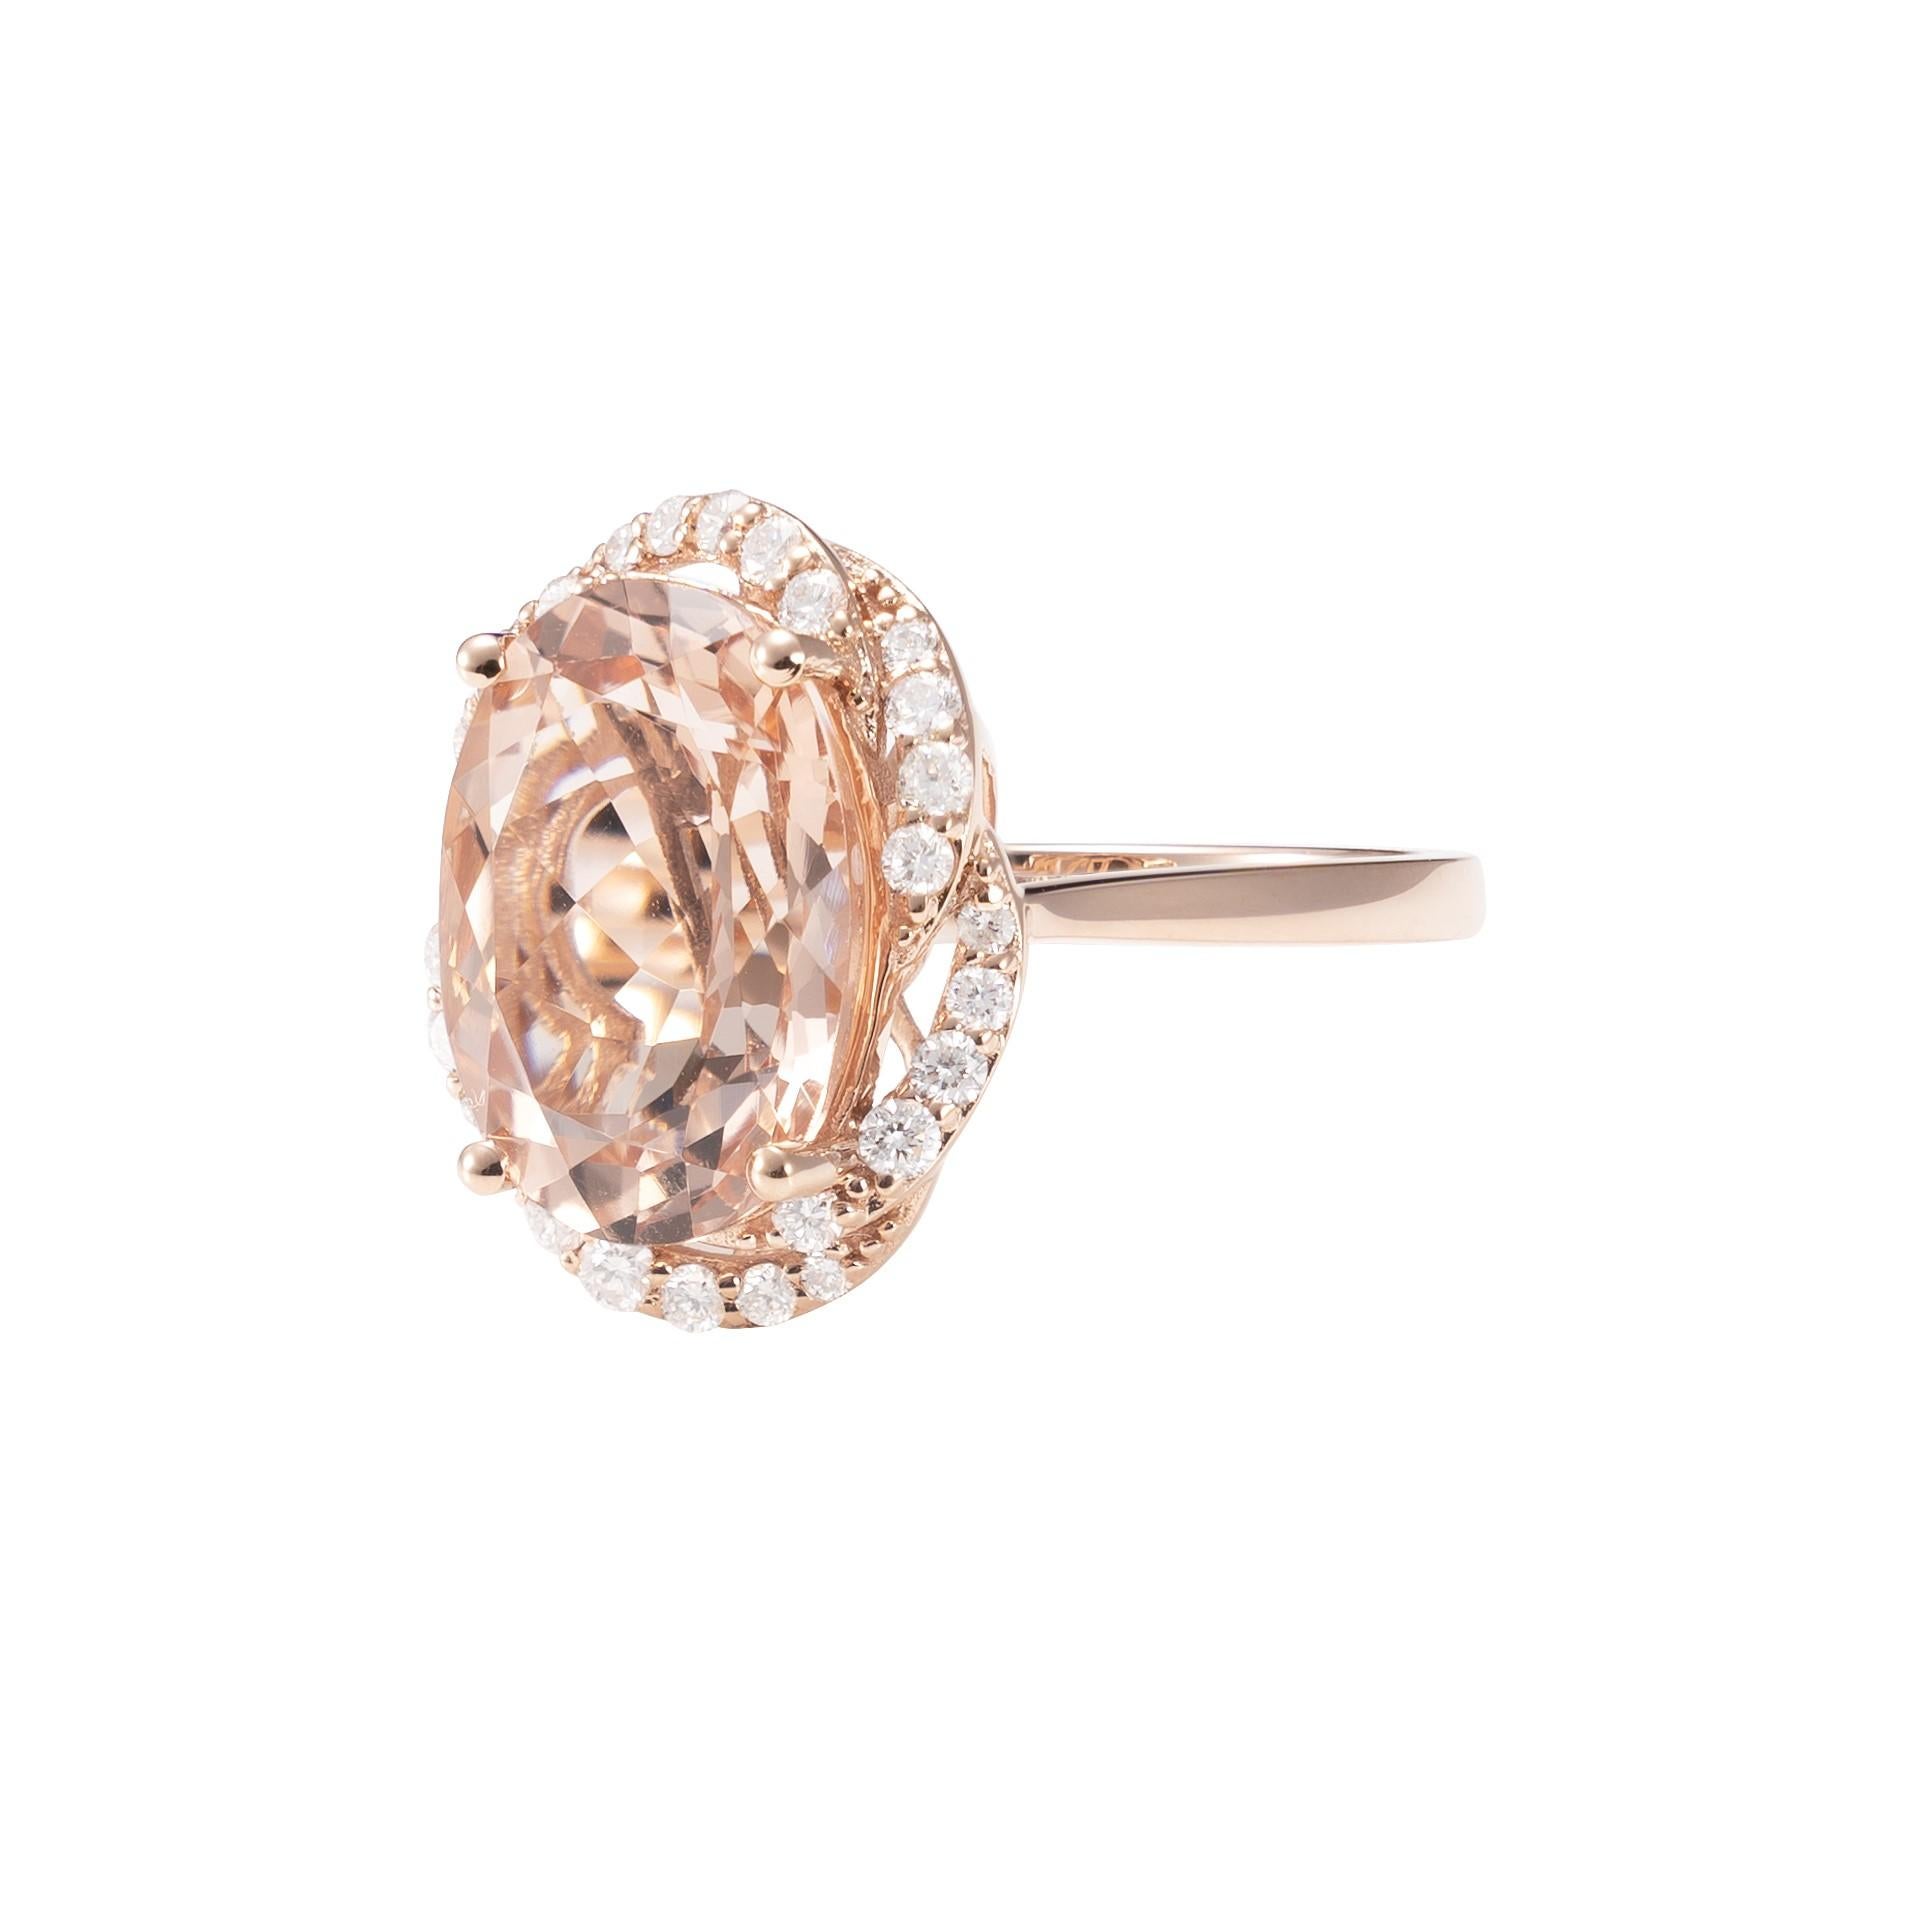 Contemporary 5.7 Carat Morganite and Diamond Ring in 18 Karat Rose Gold For Sale